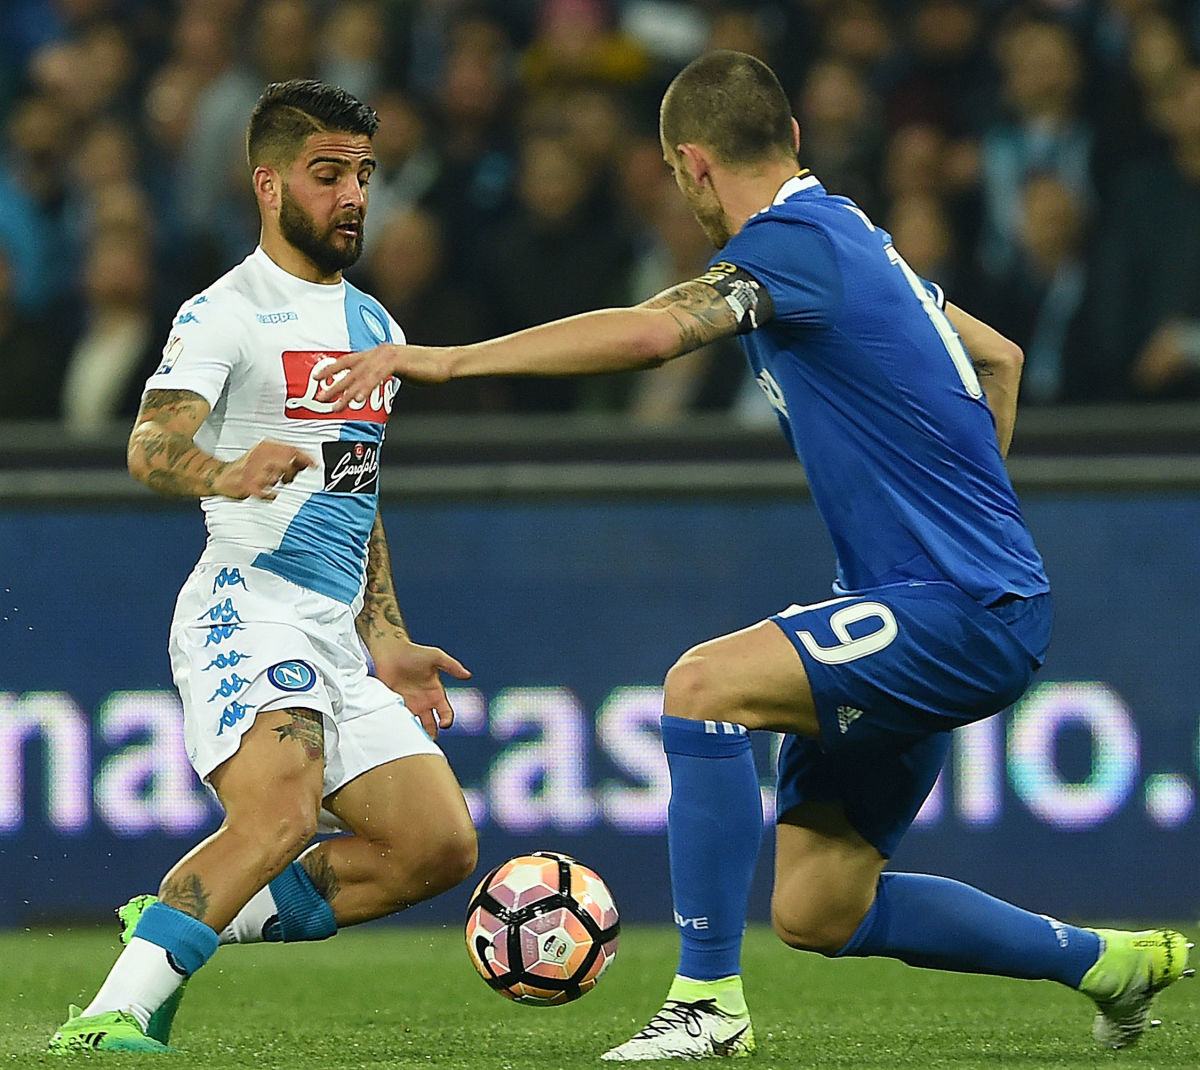 NAPLES, ITALY - APRIL 05: Player of SSC Napoli Lorenzo Insigne vies with Juventus FC player Leonardo Bonucci during the TIM Cup match between SSC Napoli and Juventus FC at Stadio San Paolo on April 5, 2017 in Naples, Italy.  (Photo by Francesco Pecoraro/Getty Images)